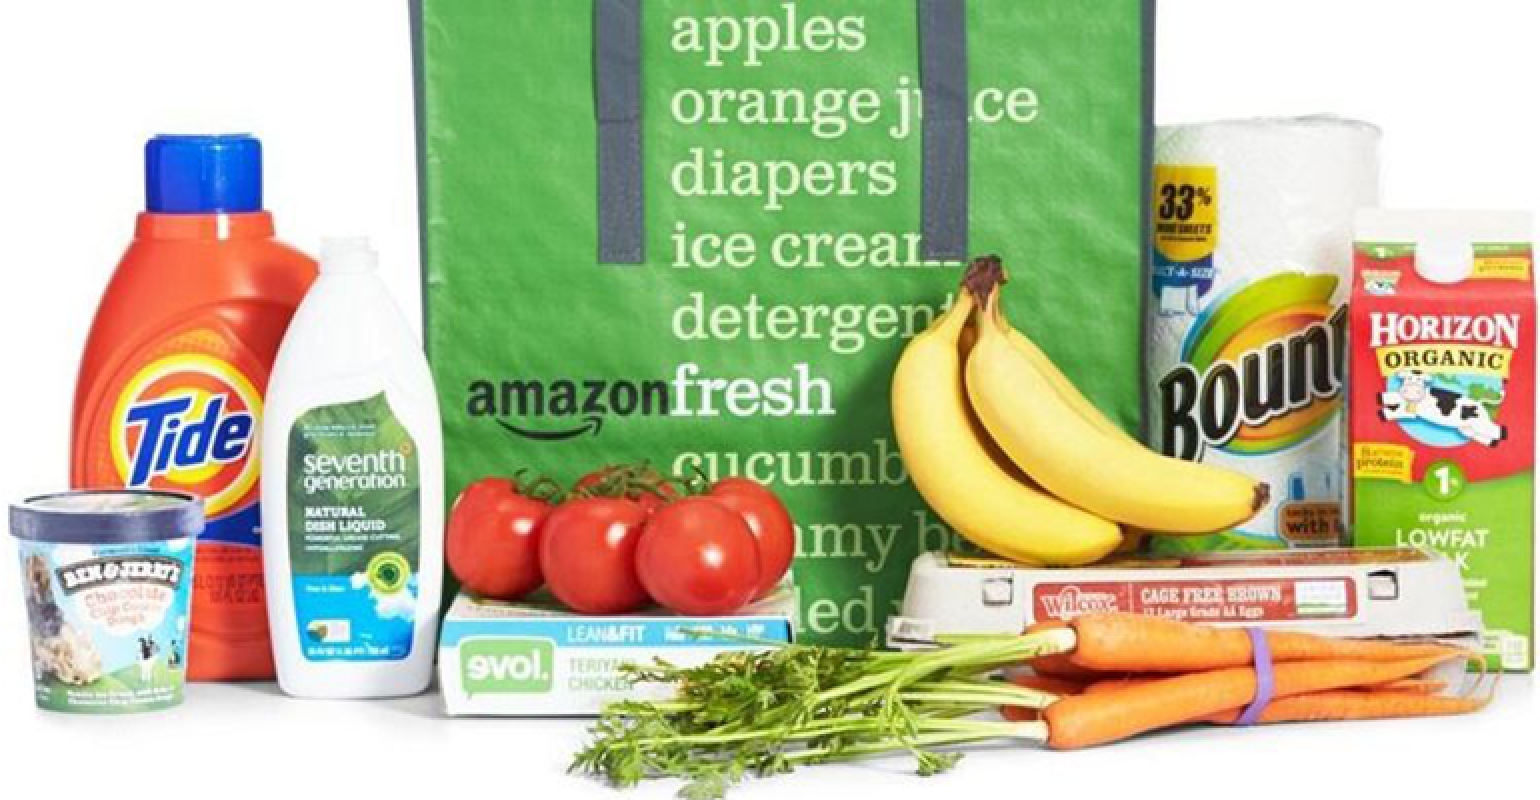 https://www.supermarketnews.com/sites/supermarketnews.com/files/styles/article_featured_retina/public/AmazonFresh-groceries-delivery.png?itok=UGownPlg